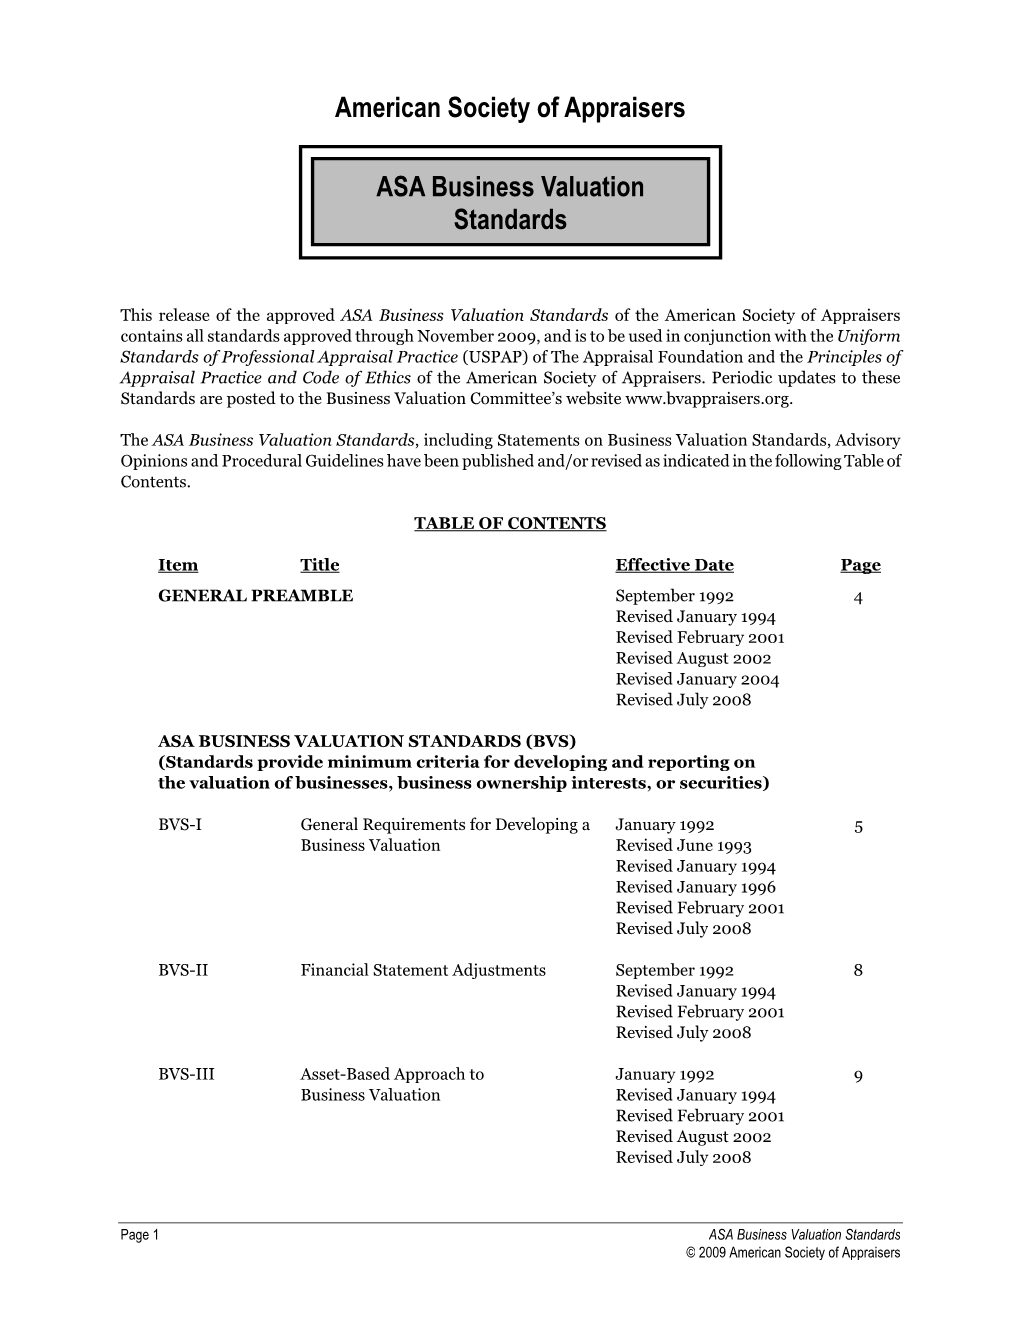 AMERICAN SOCIETY of APPRAISERS ASA Business Valuation Standards